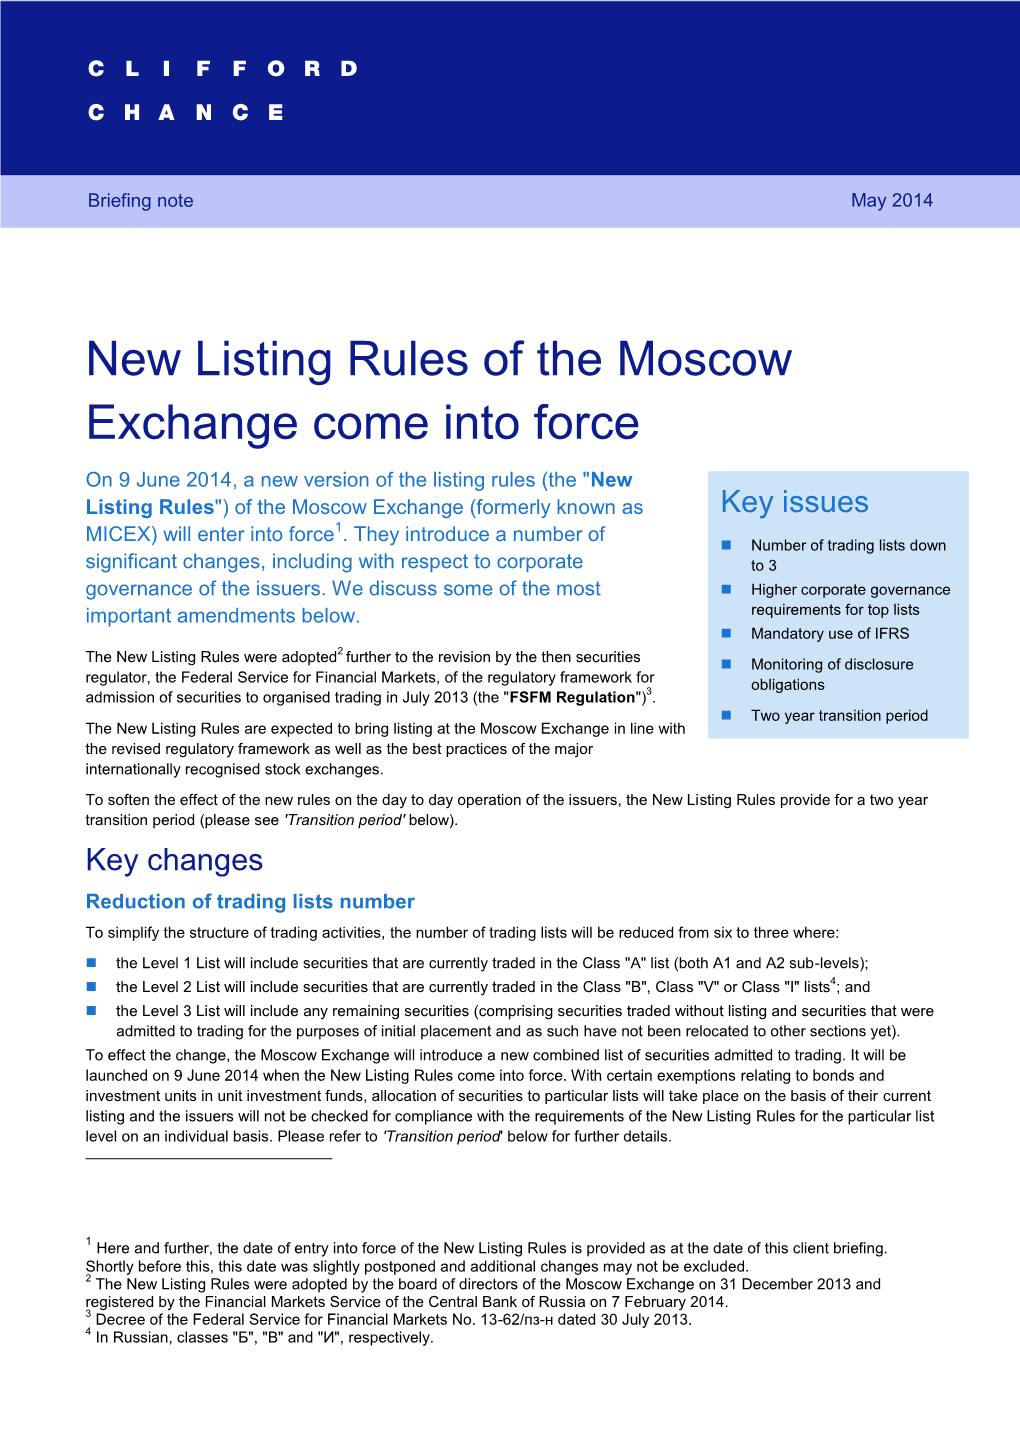 New Listing Rules of the Moscow Exchange Come Into Force 1